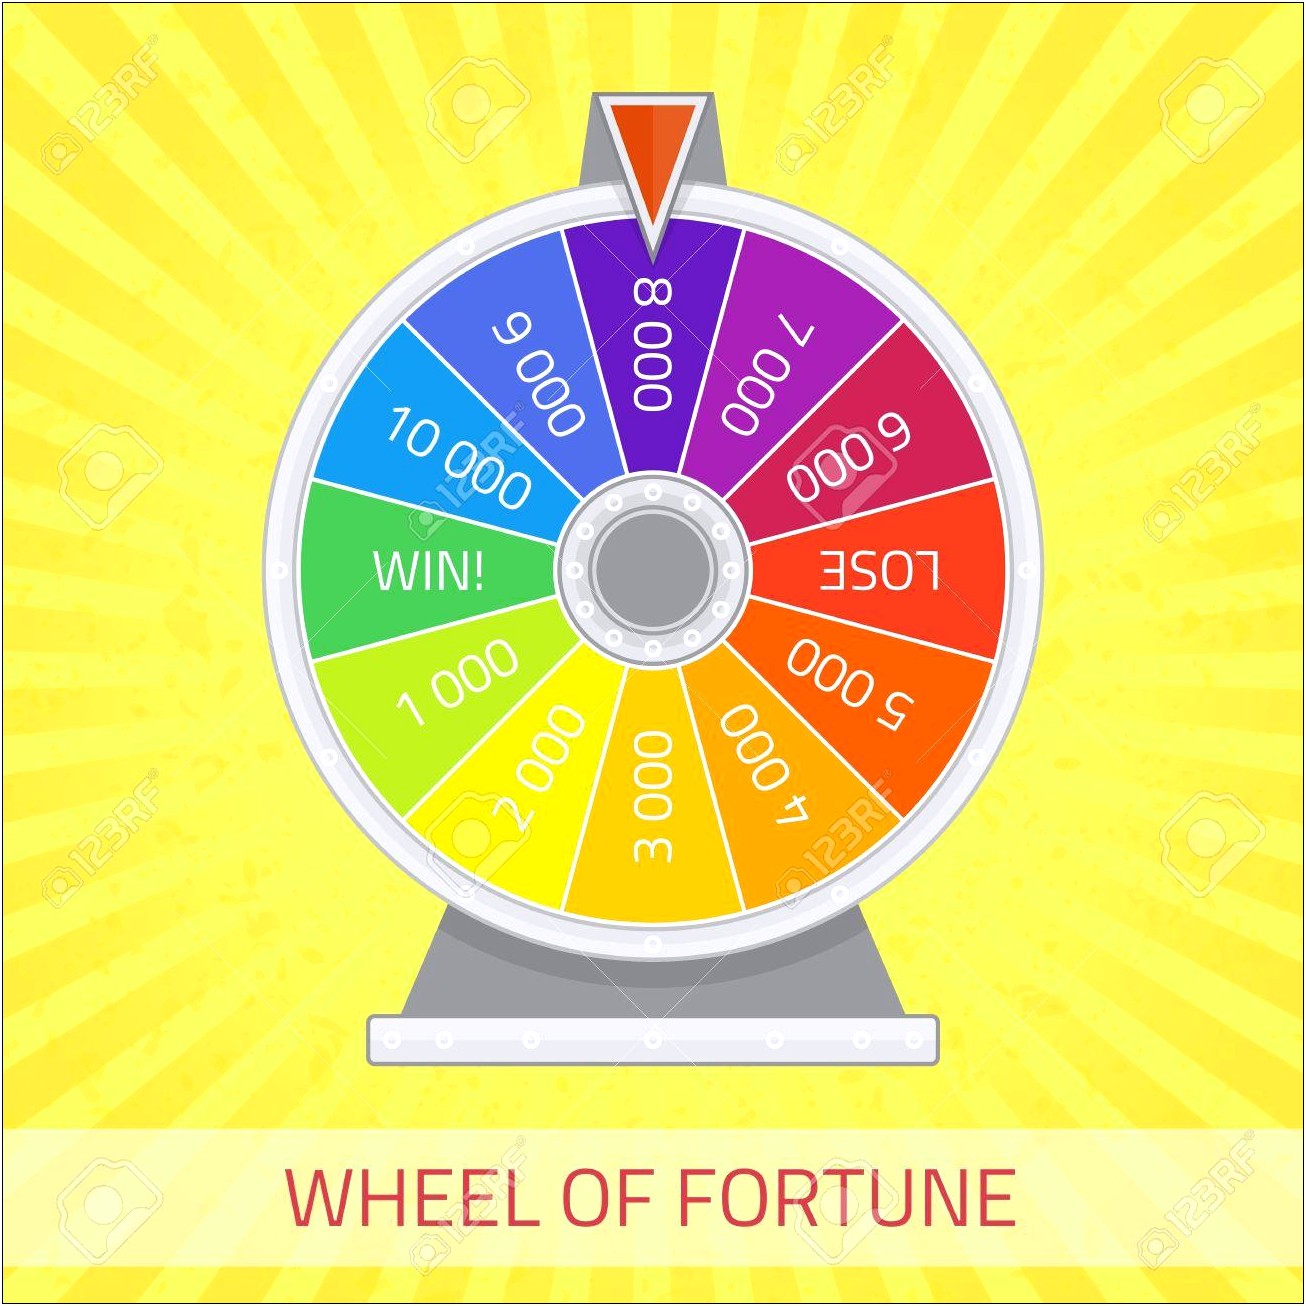 Wheel Of Fortune Powerpoint Template Free